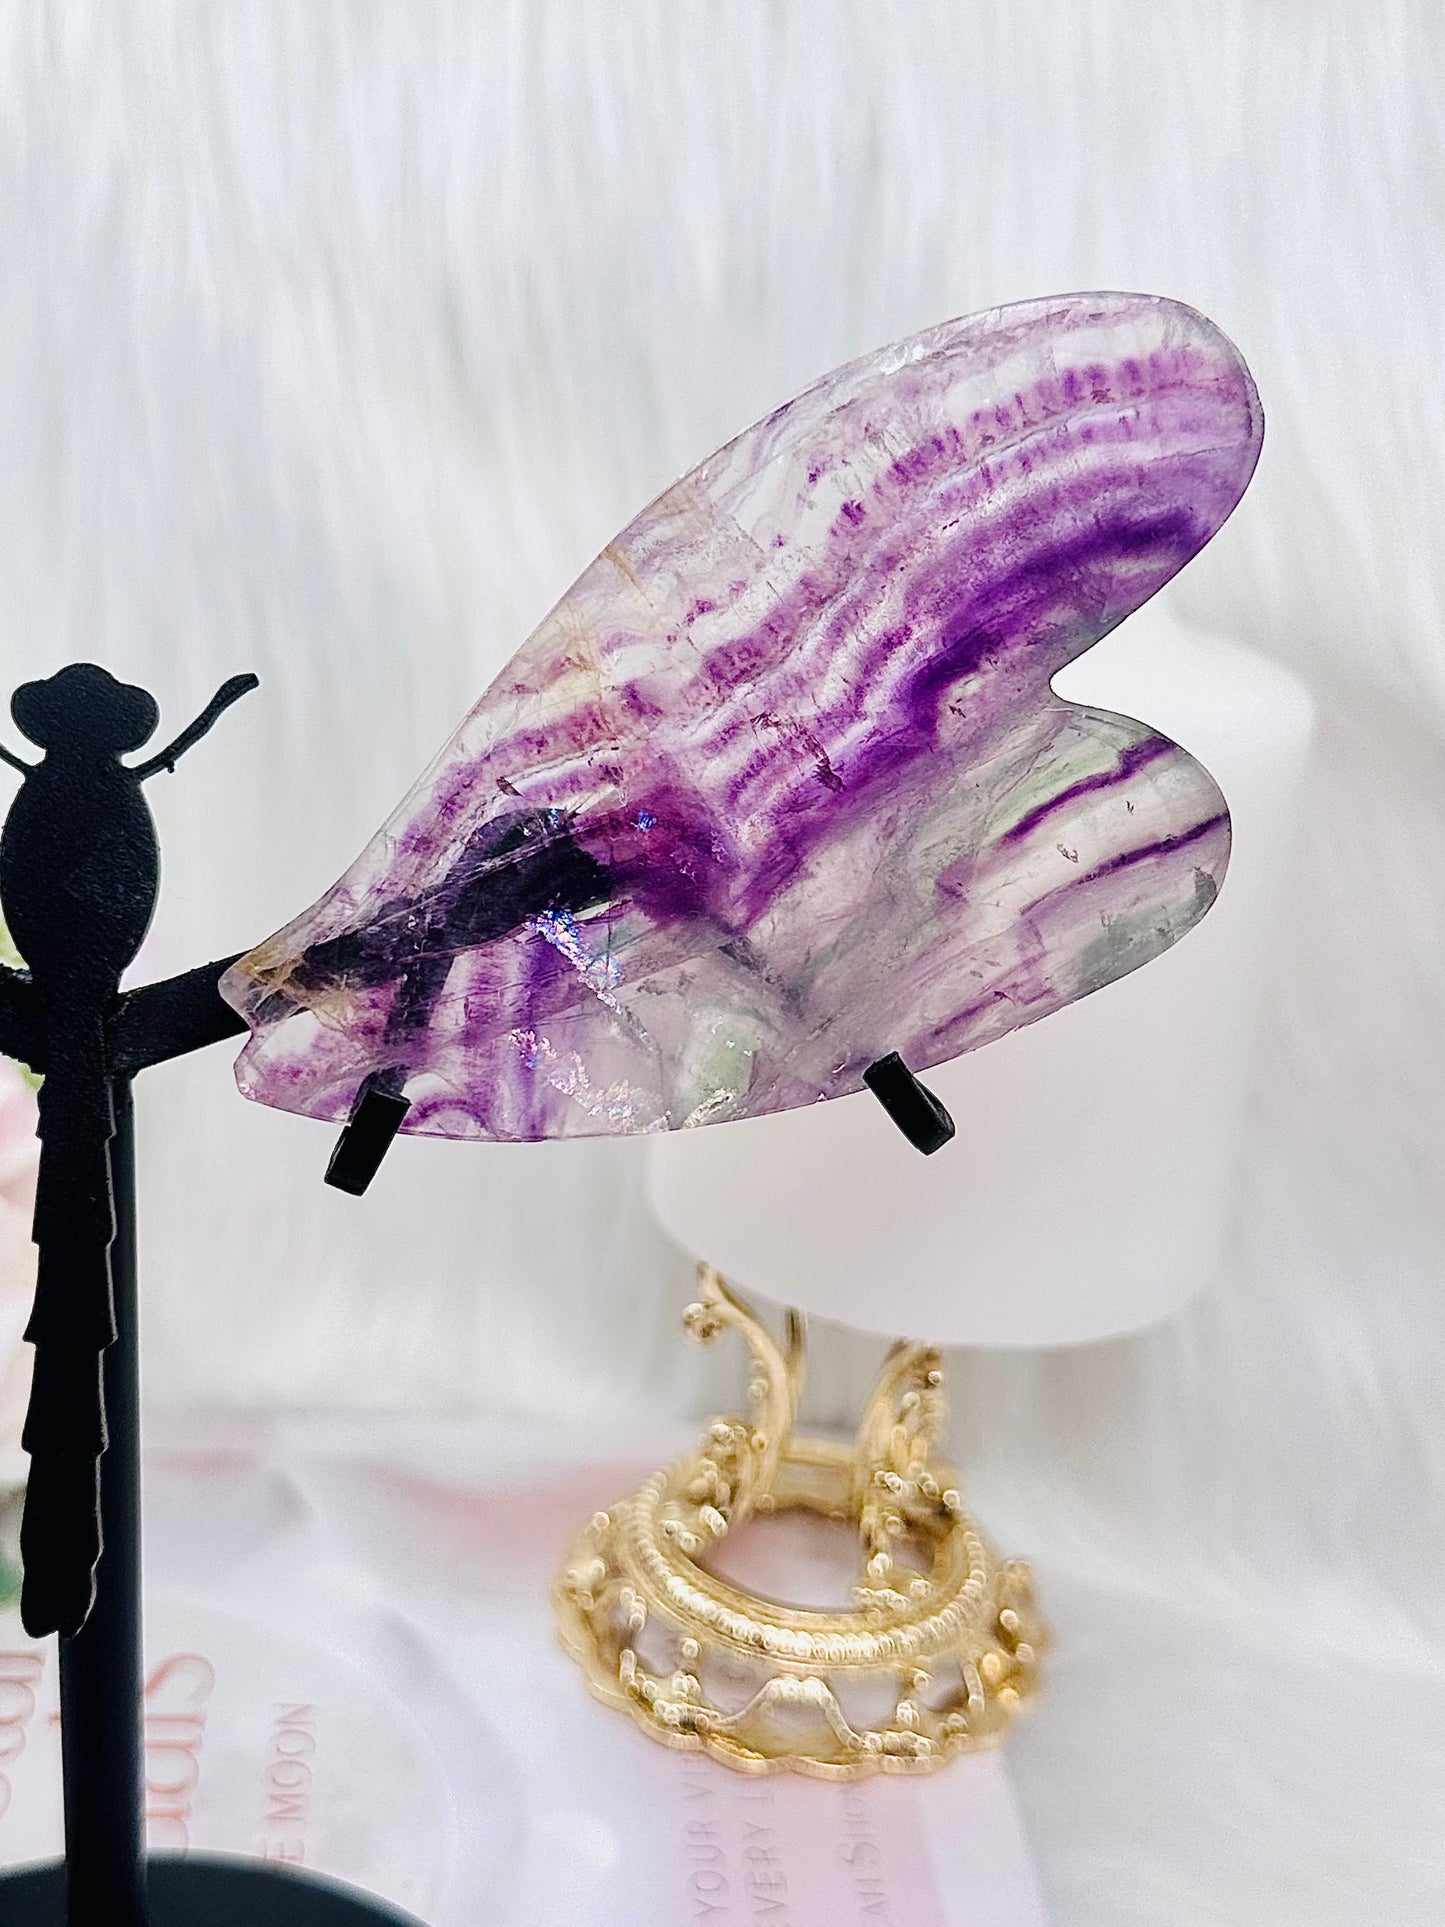 What A Beauty!!! Large 18.5cm Stunning Purple Fluorite Dragonfly Wings On Black Stand